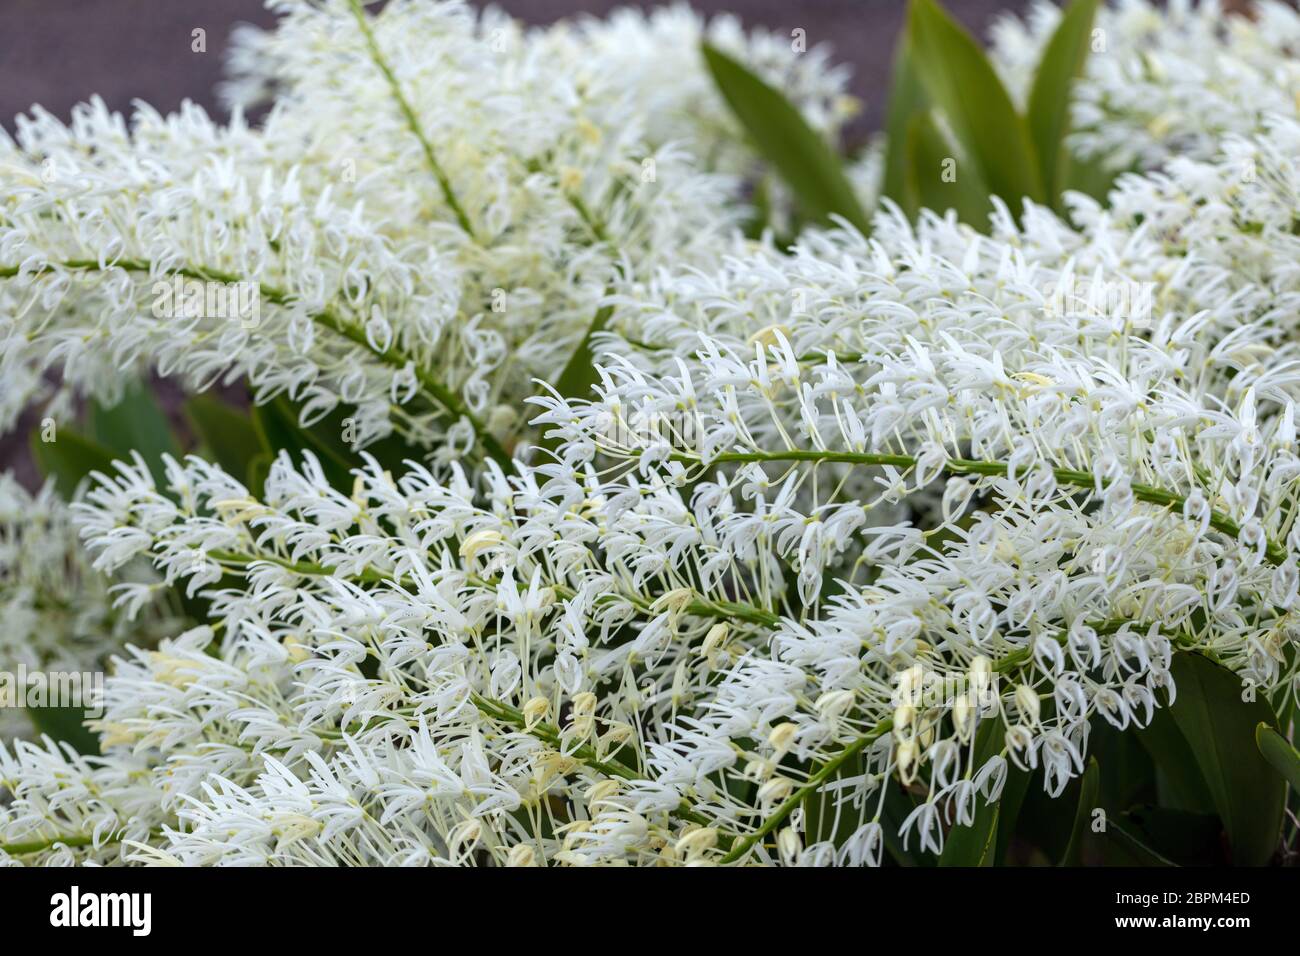 Dendrobium speciosum group of small white flowers in bloom, orchid flowers Stock Photo